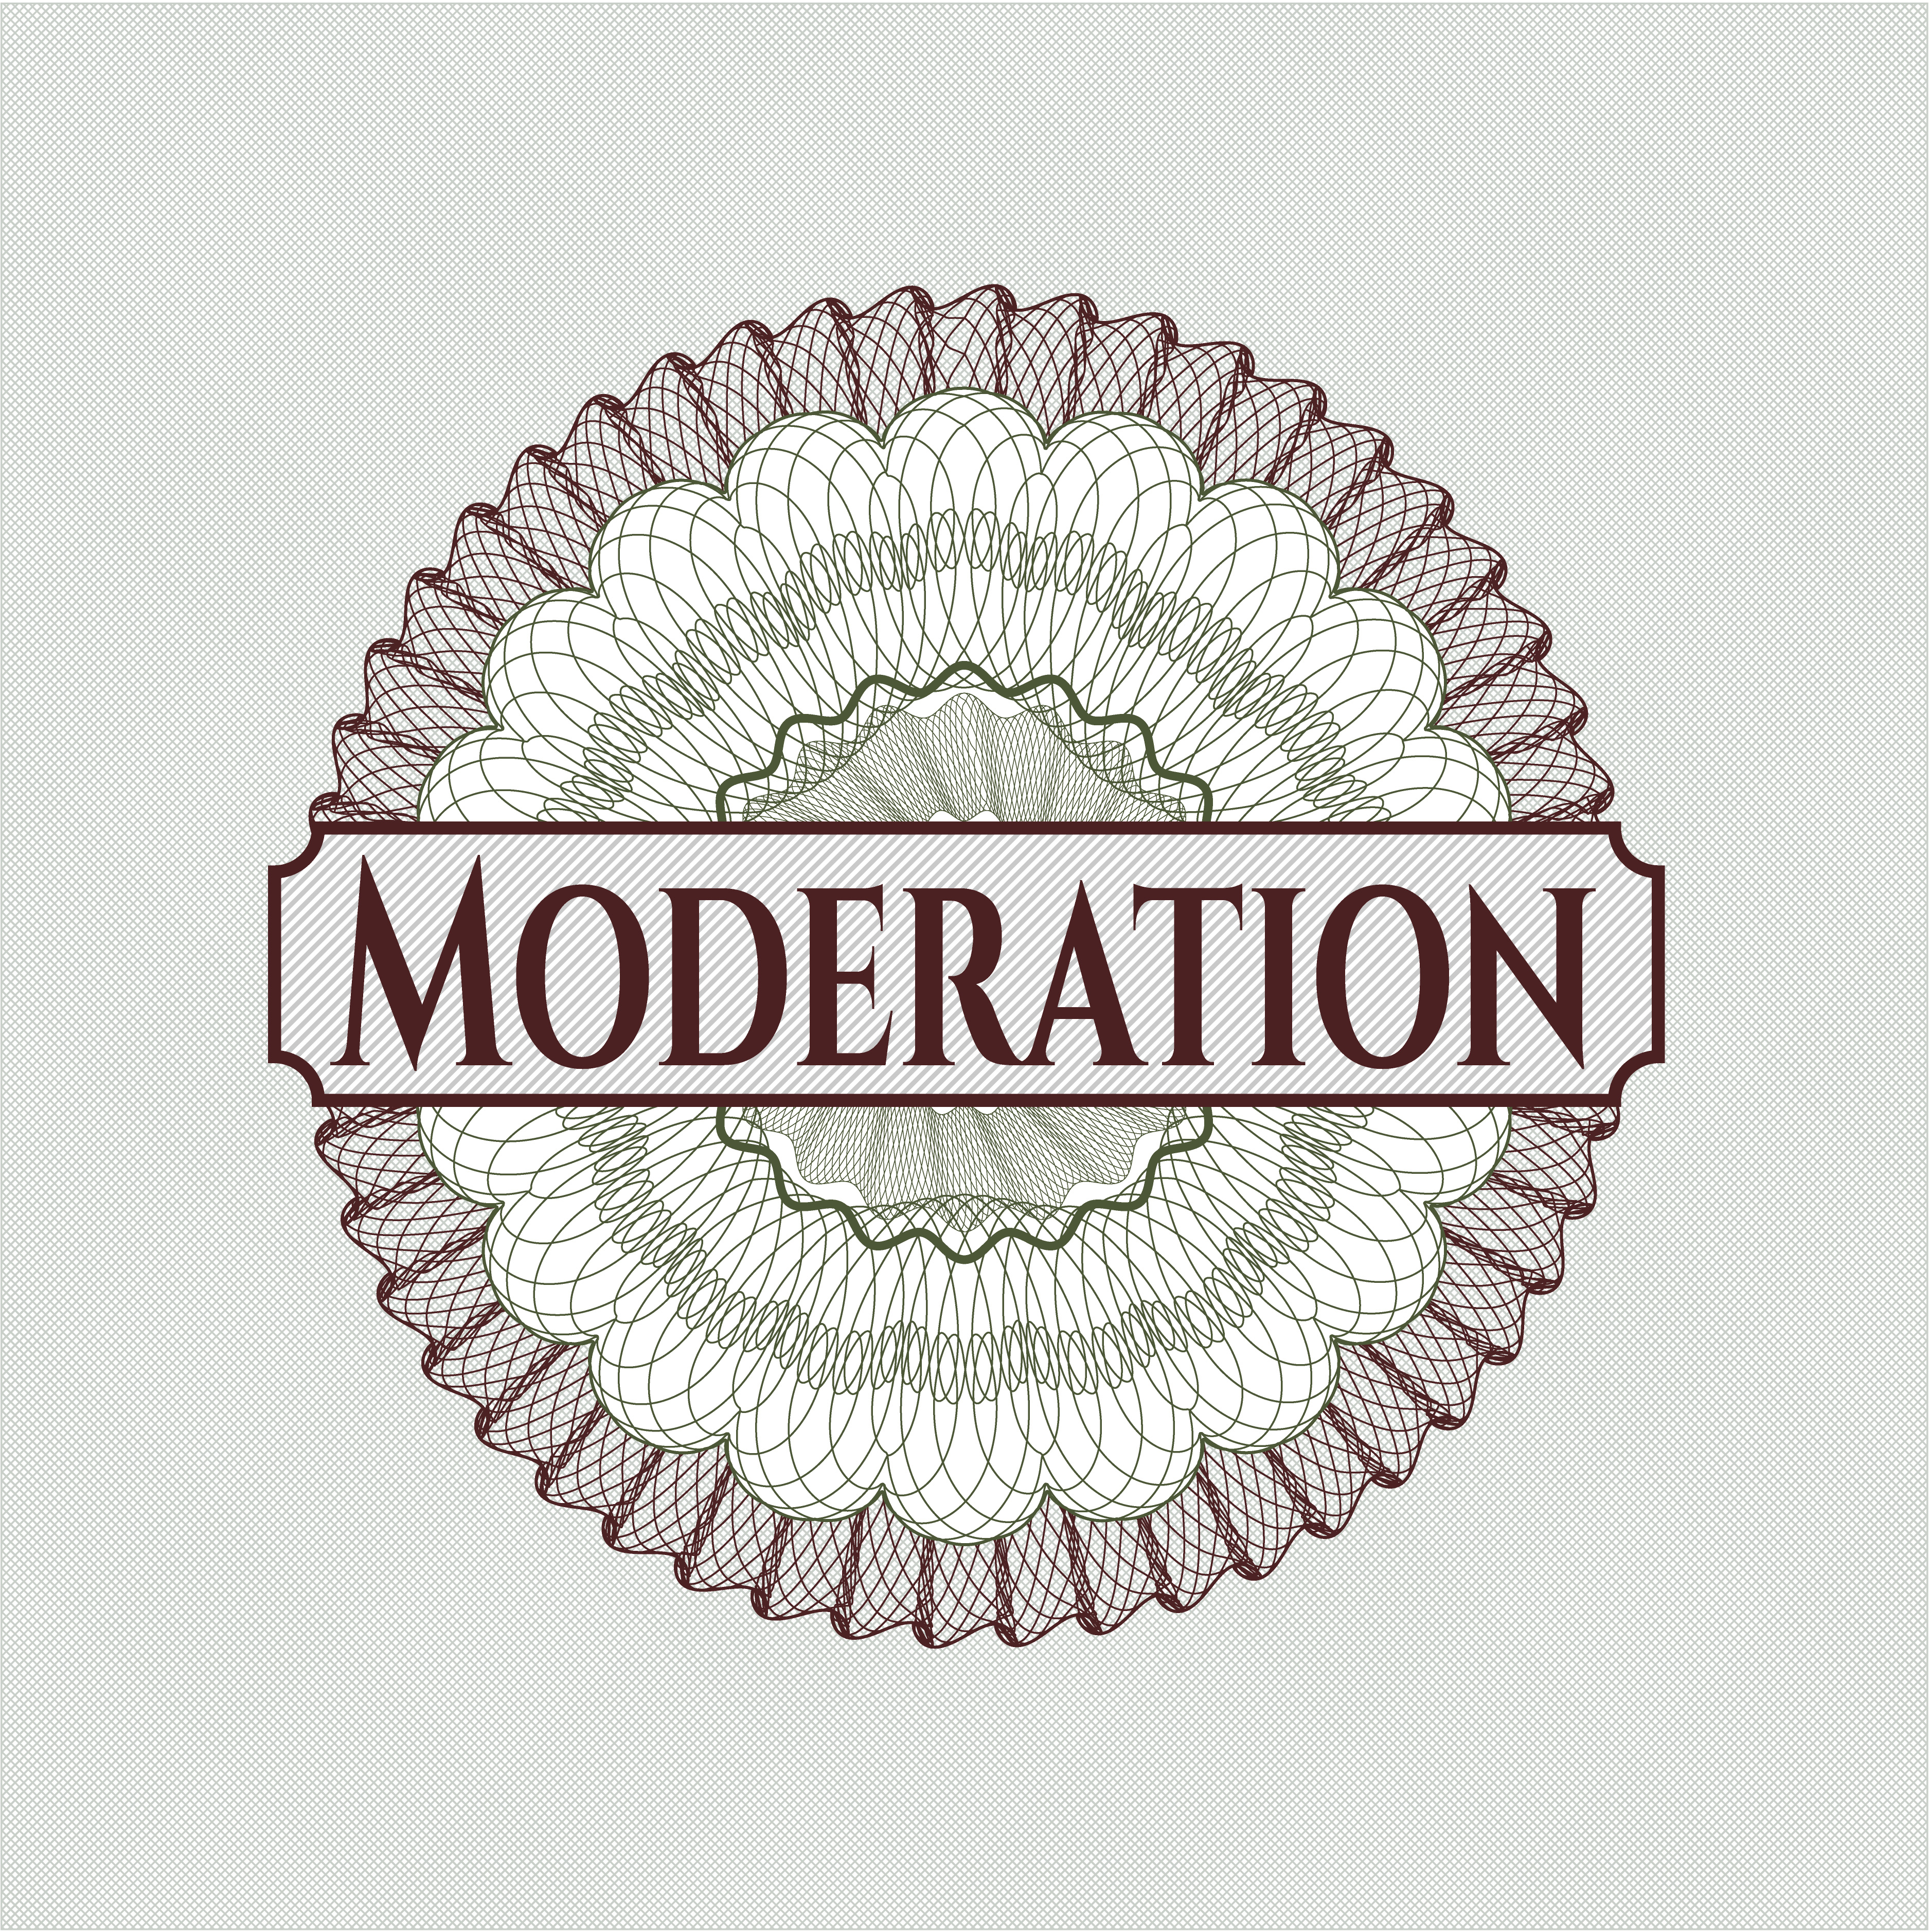 Drinking alcohol in moderation, does it work?